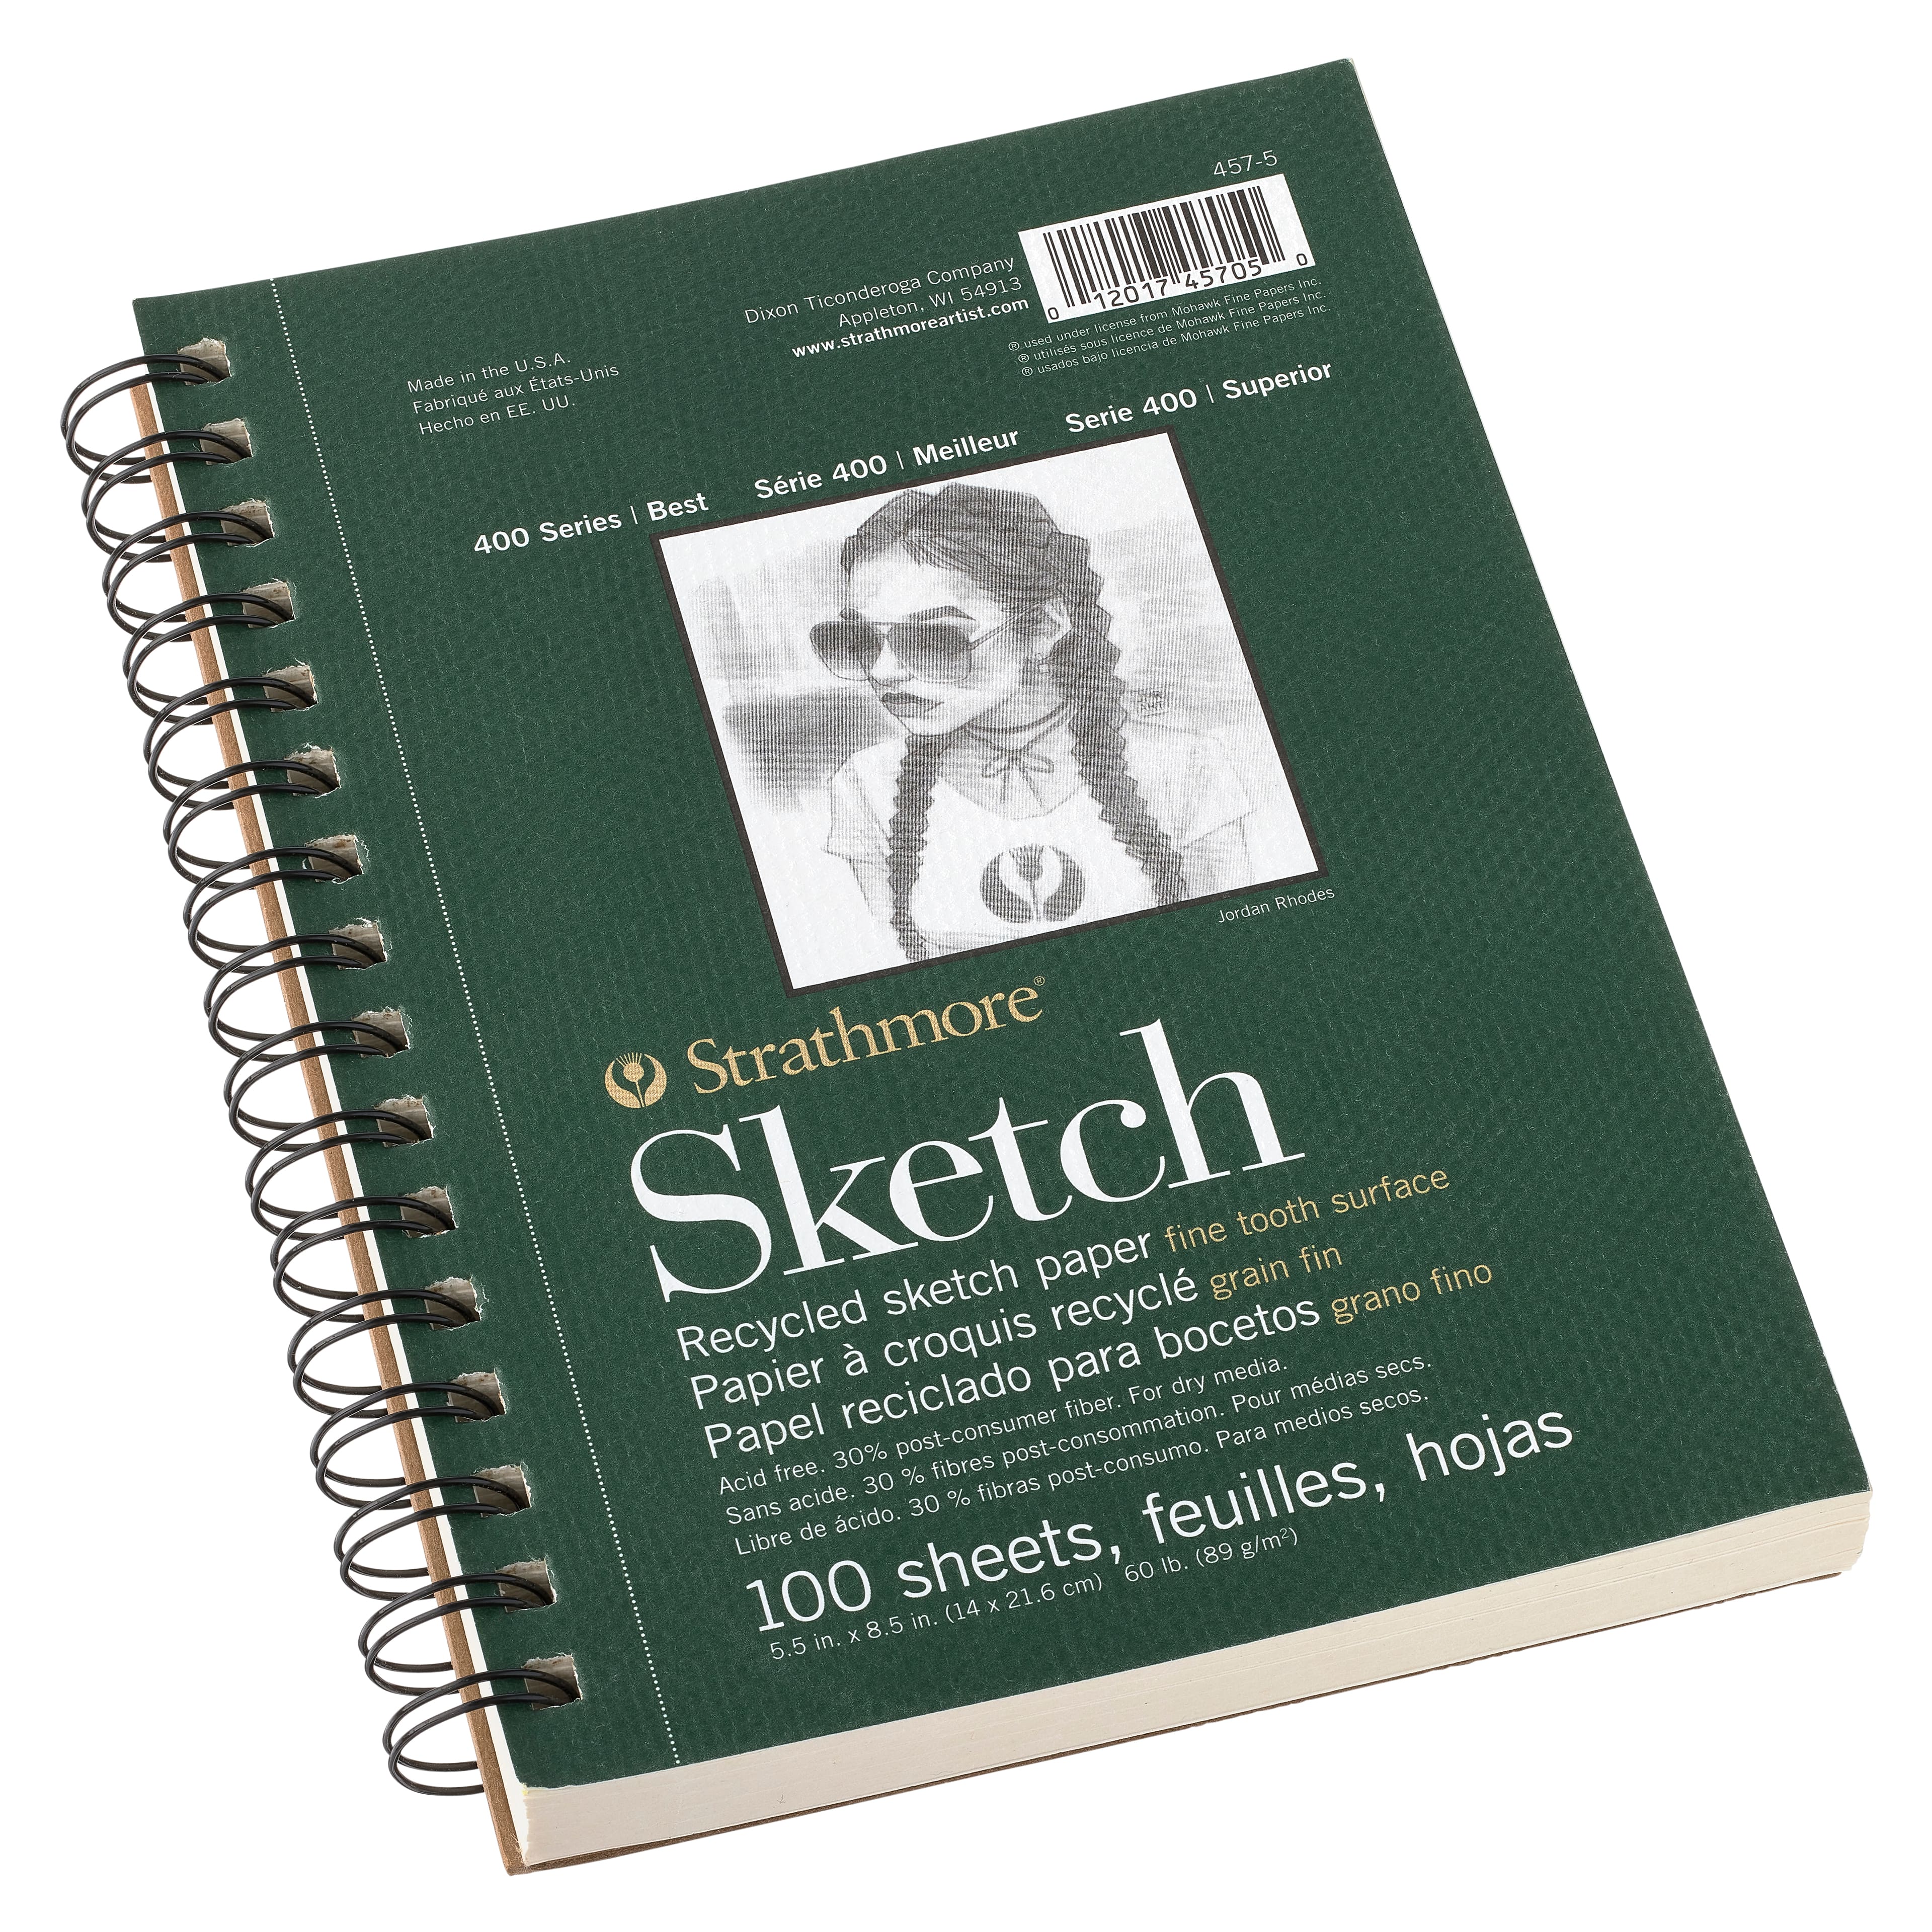  Strathmore 400 Series Sketch Pad, Recycled Paper, 9x12 inch,  100 Sheets - Artist Sketchbook for Drawing, Illustration, Art Class  Students : Everything Else